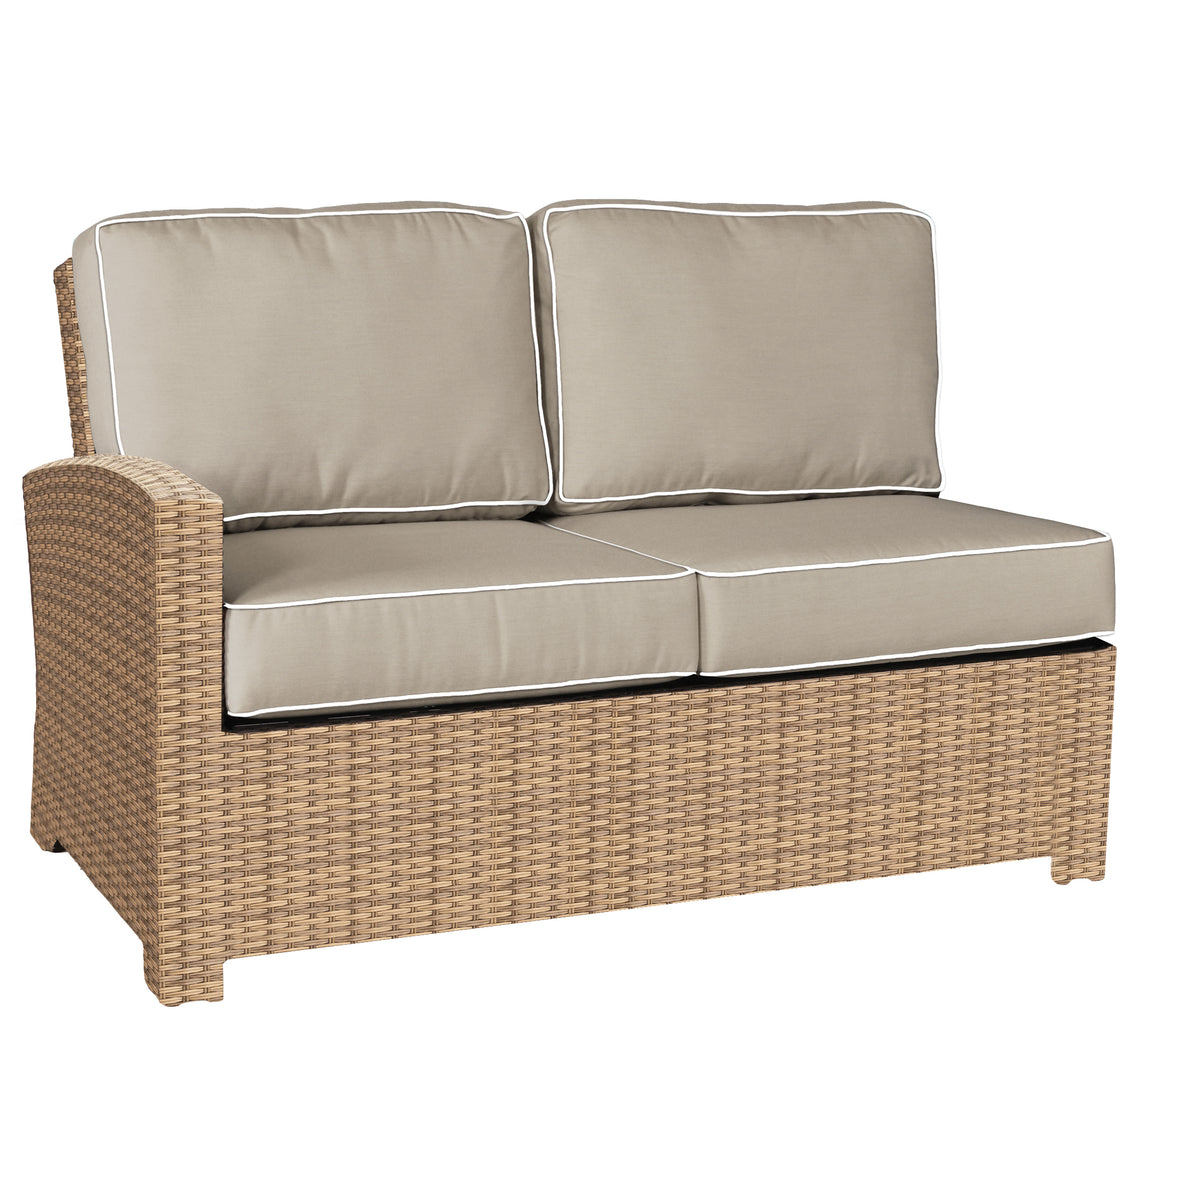 Forever Patio Barbados Wicker Sectional Left Arm Facing Loveseat